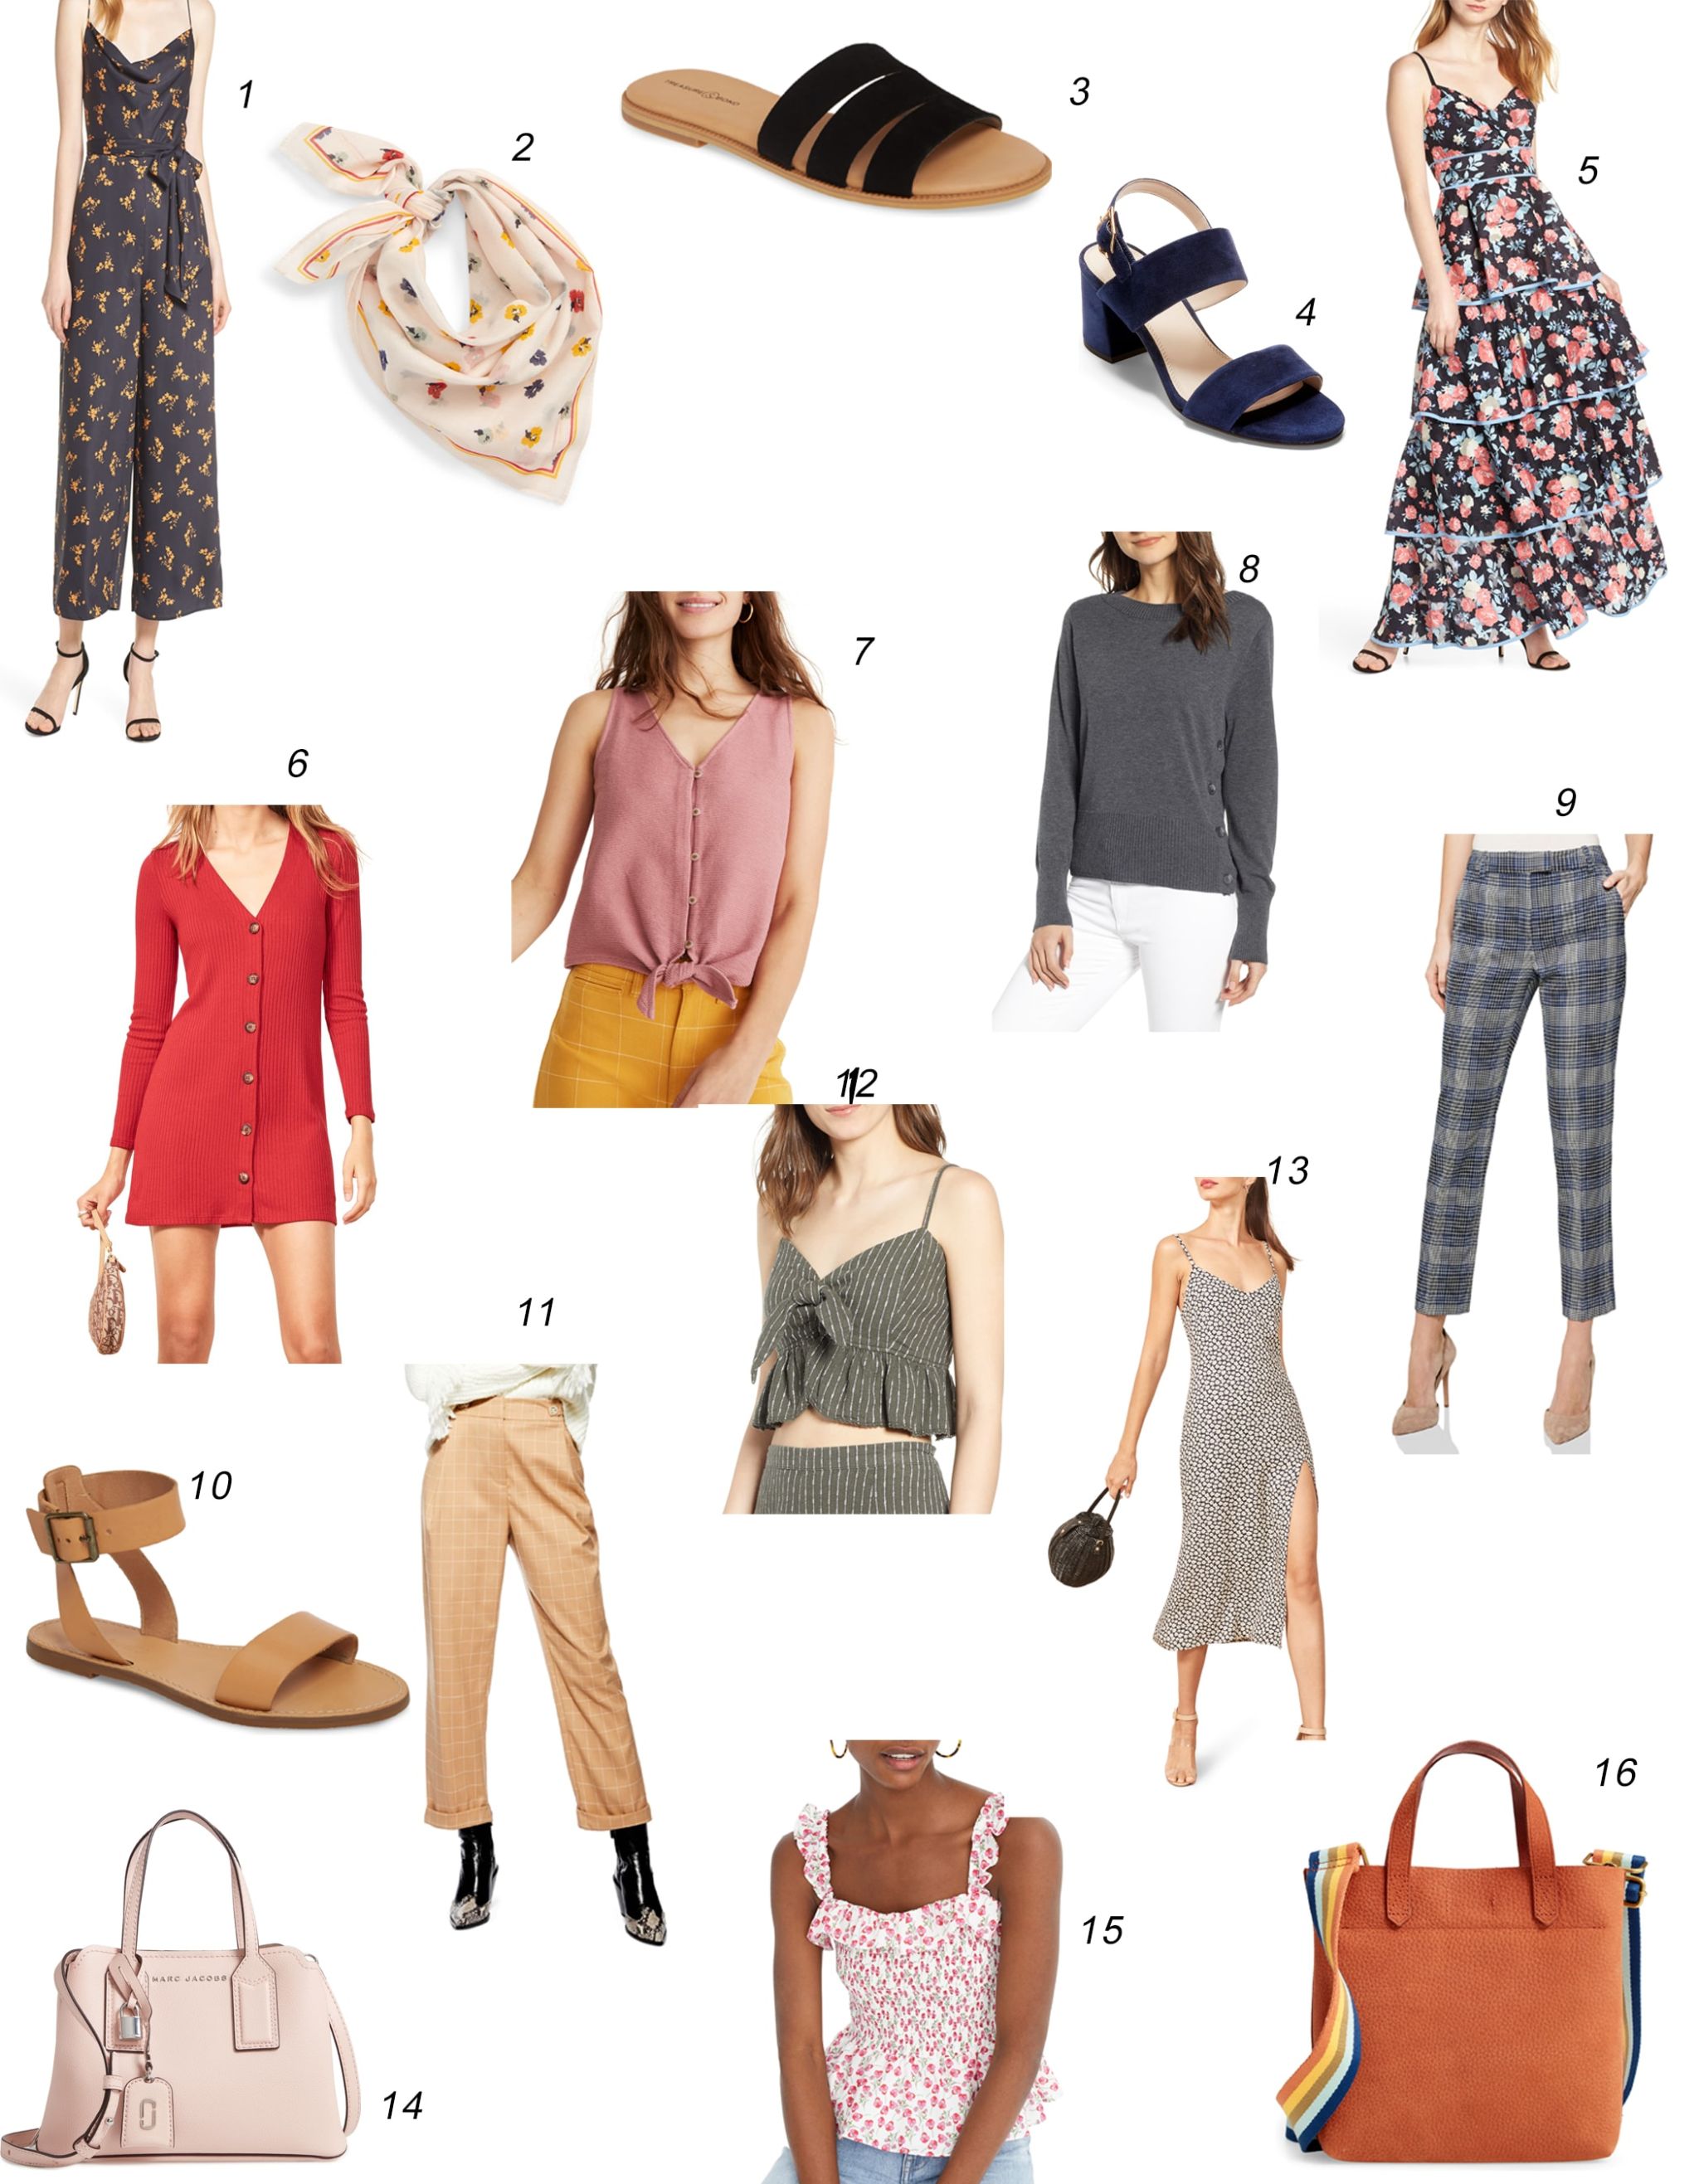 Nordstrom Half-Yearly Sale: What I'm Buying